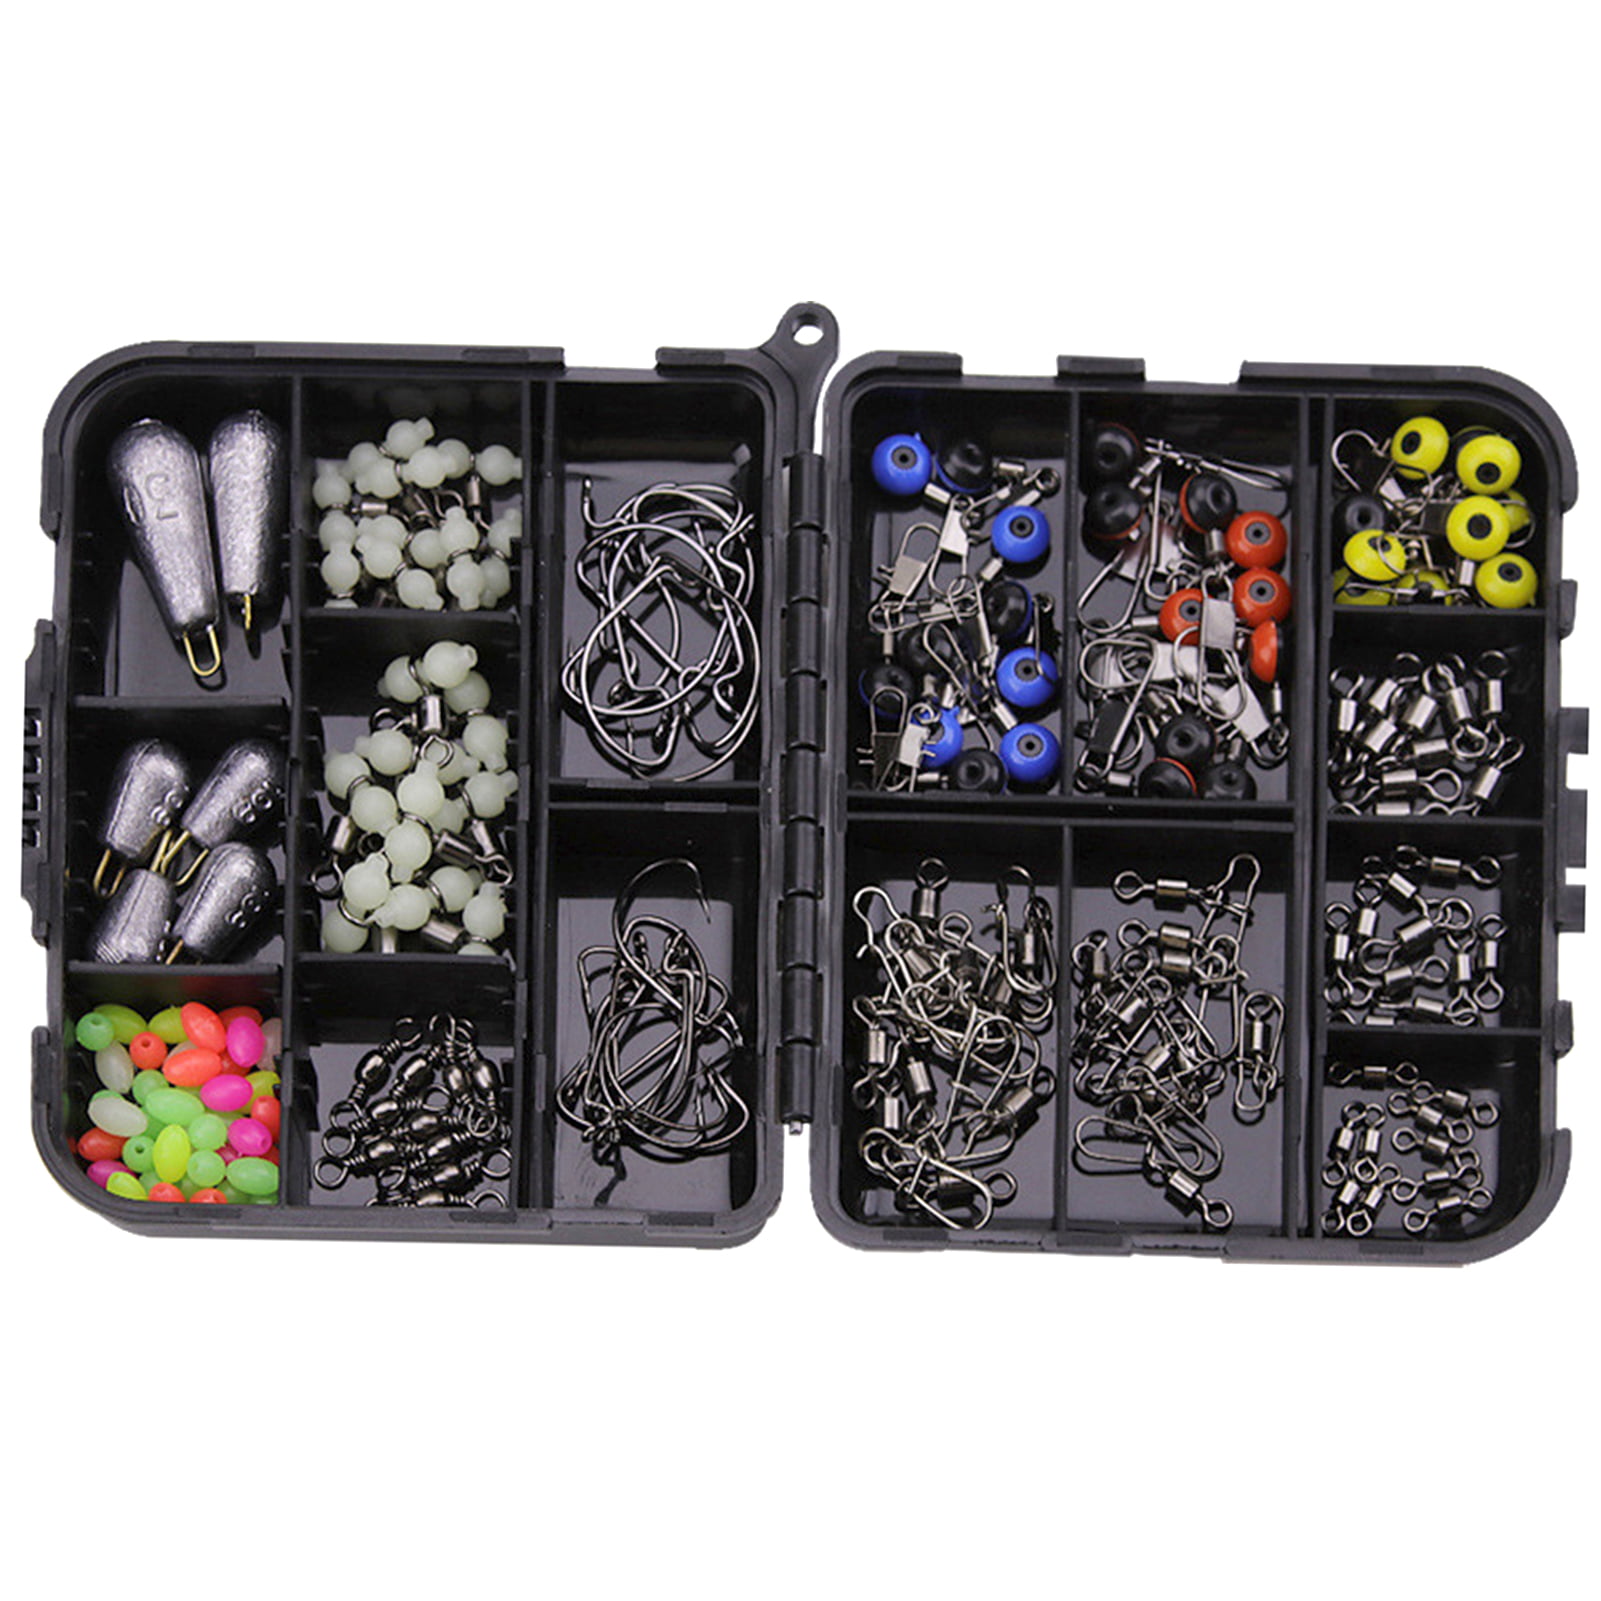 SANWOOD 172Pcs/Set Multifunctional Fishing Lure Hook Accessory Tackle Tools  Box for Angling 